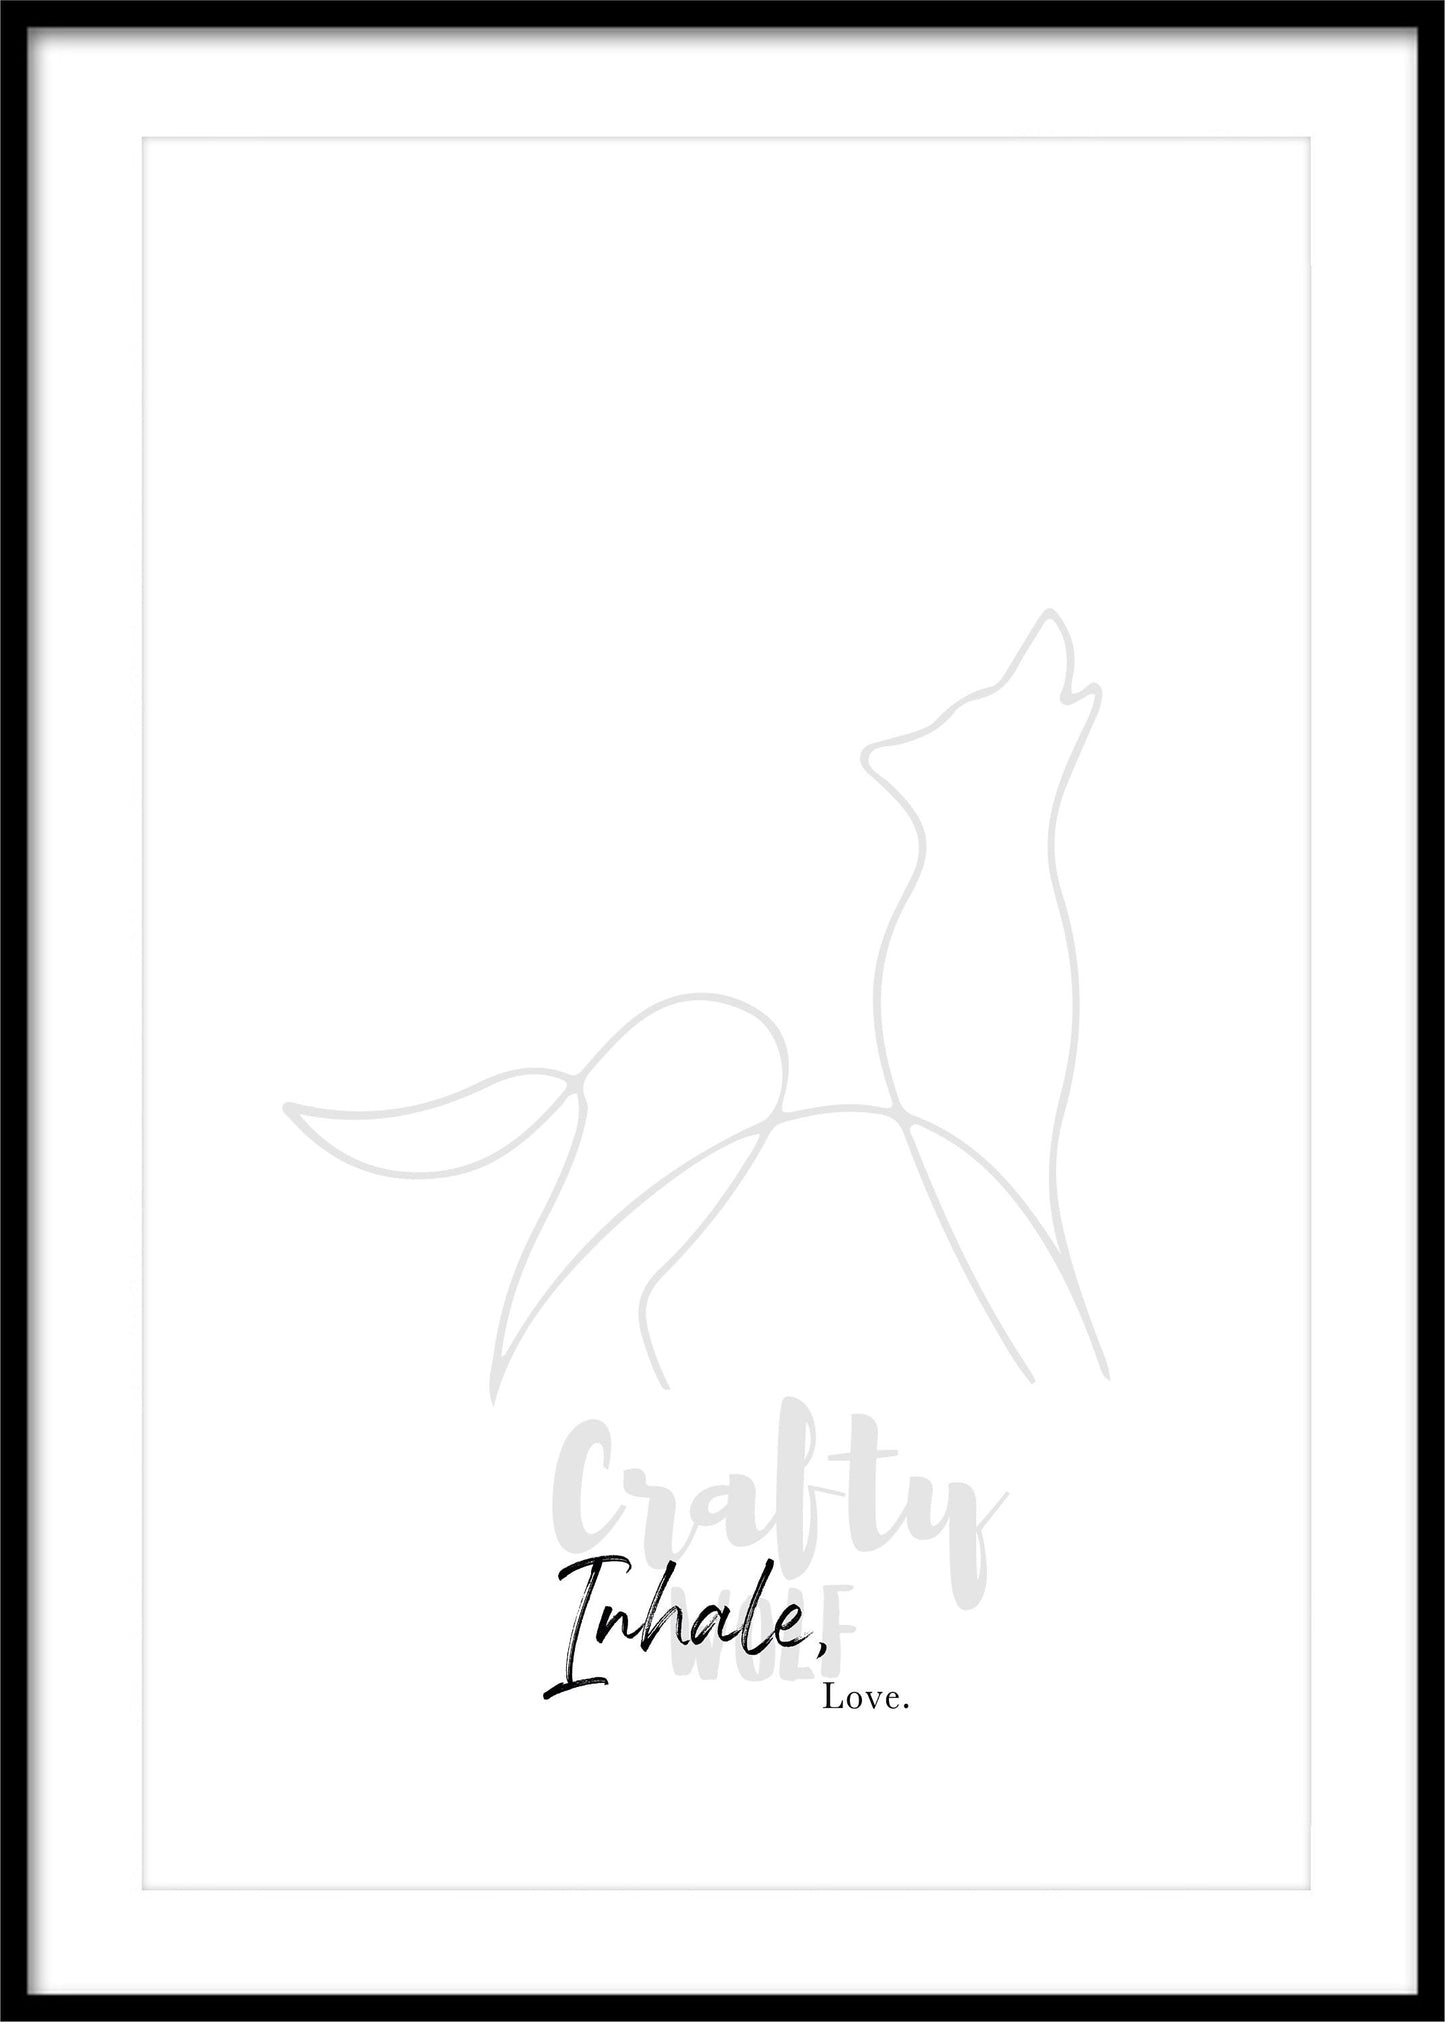 'Inhale | Exhale' Poster - Yoga text